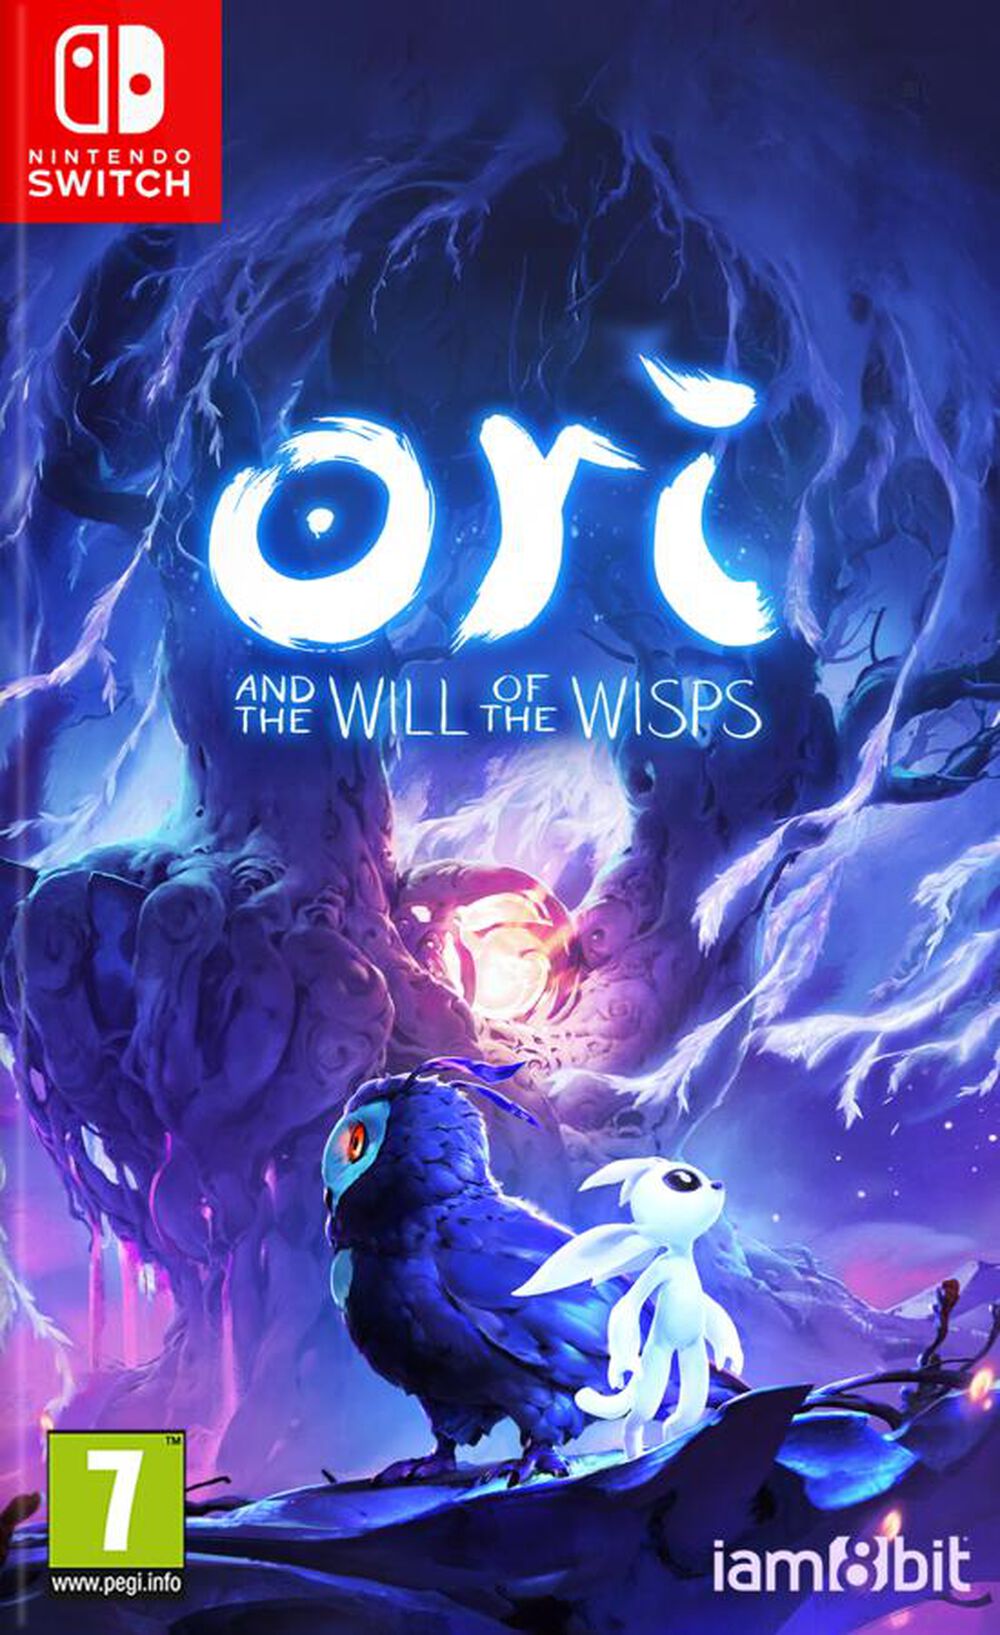 jaquette reduite de Ori and the Will of the Wisps sur Switch